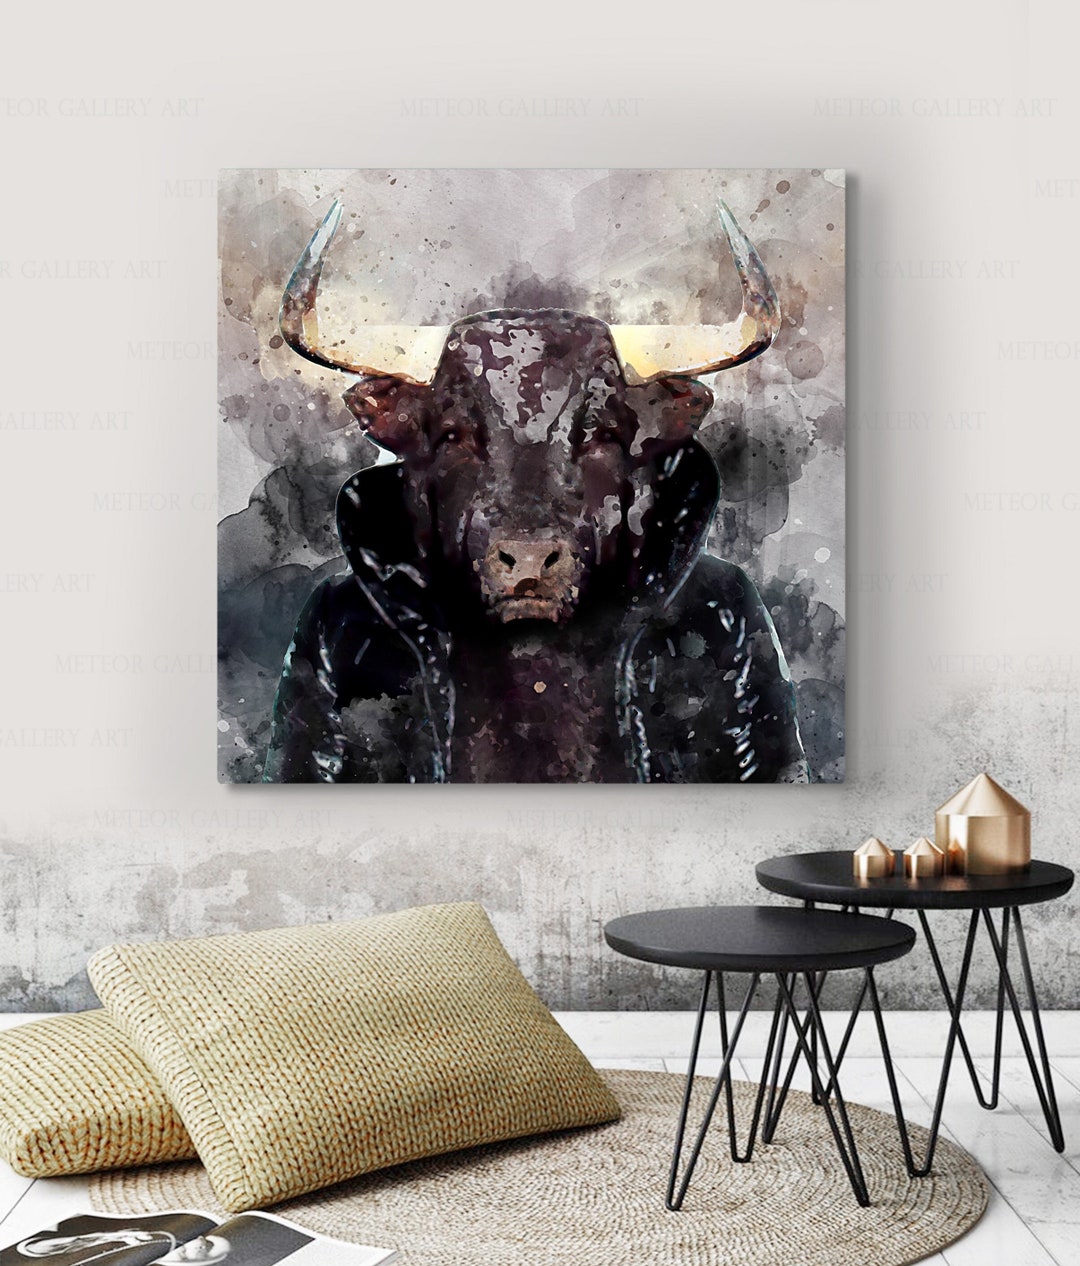 Bull Wall Art Ox Abstract Watercolor Effect Animal Canvas